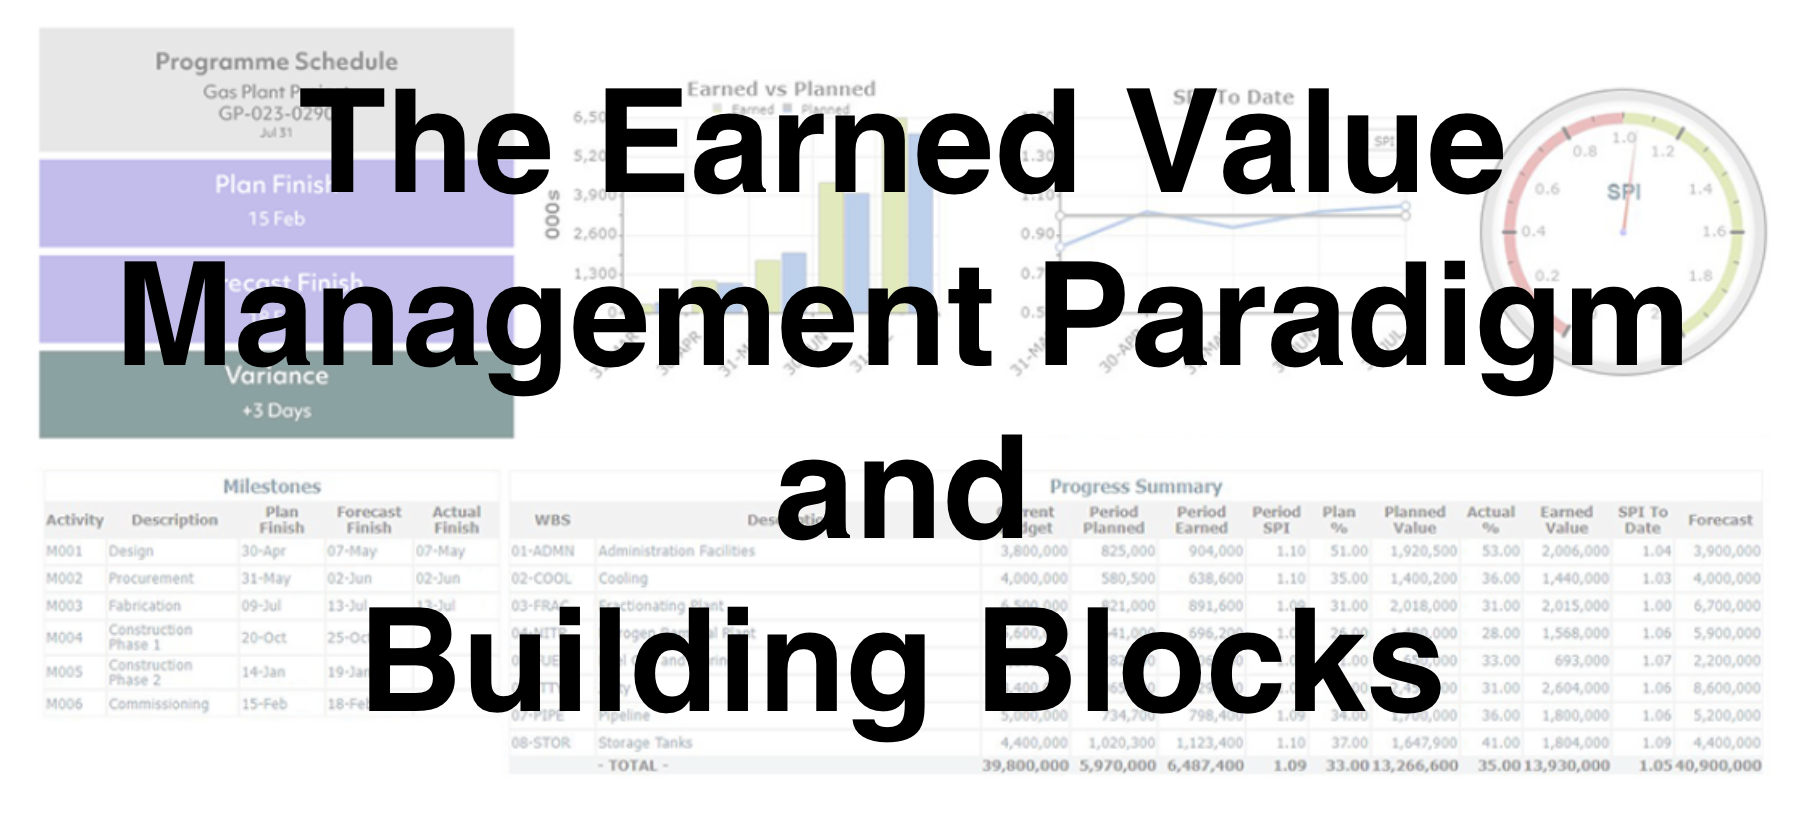 The Earned Value Management Paradigm and Building Blocks